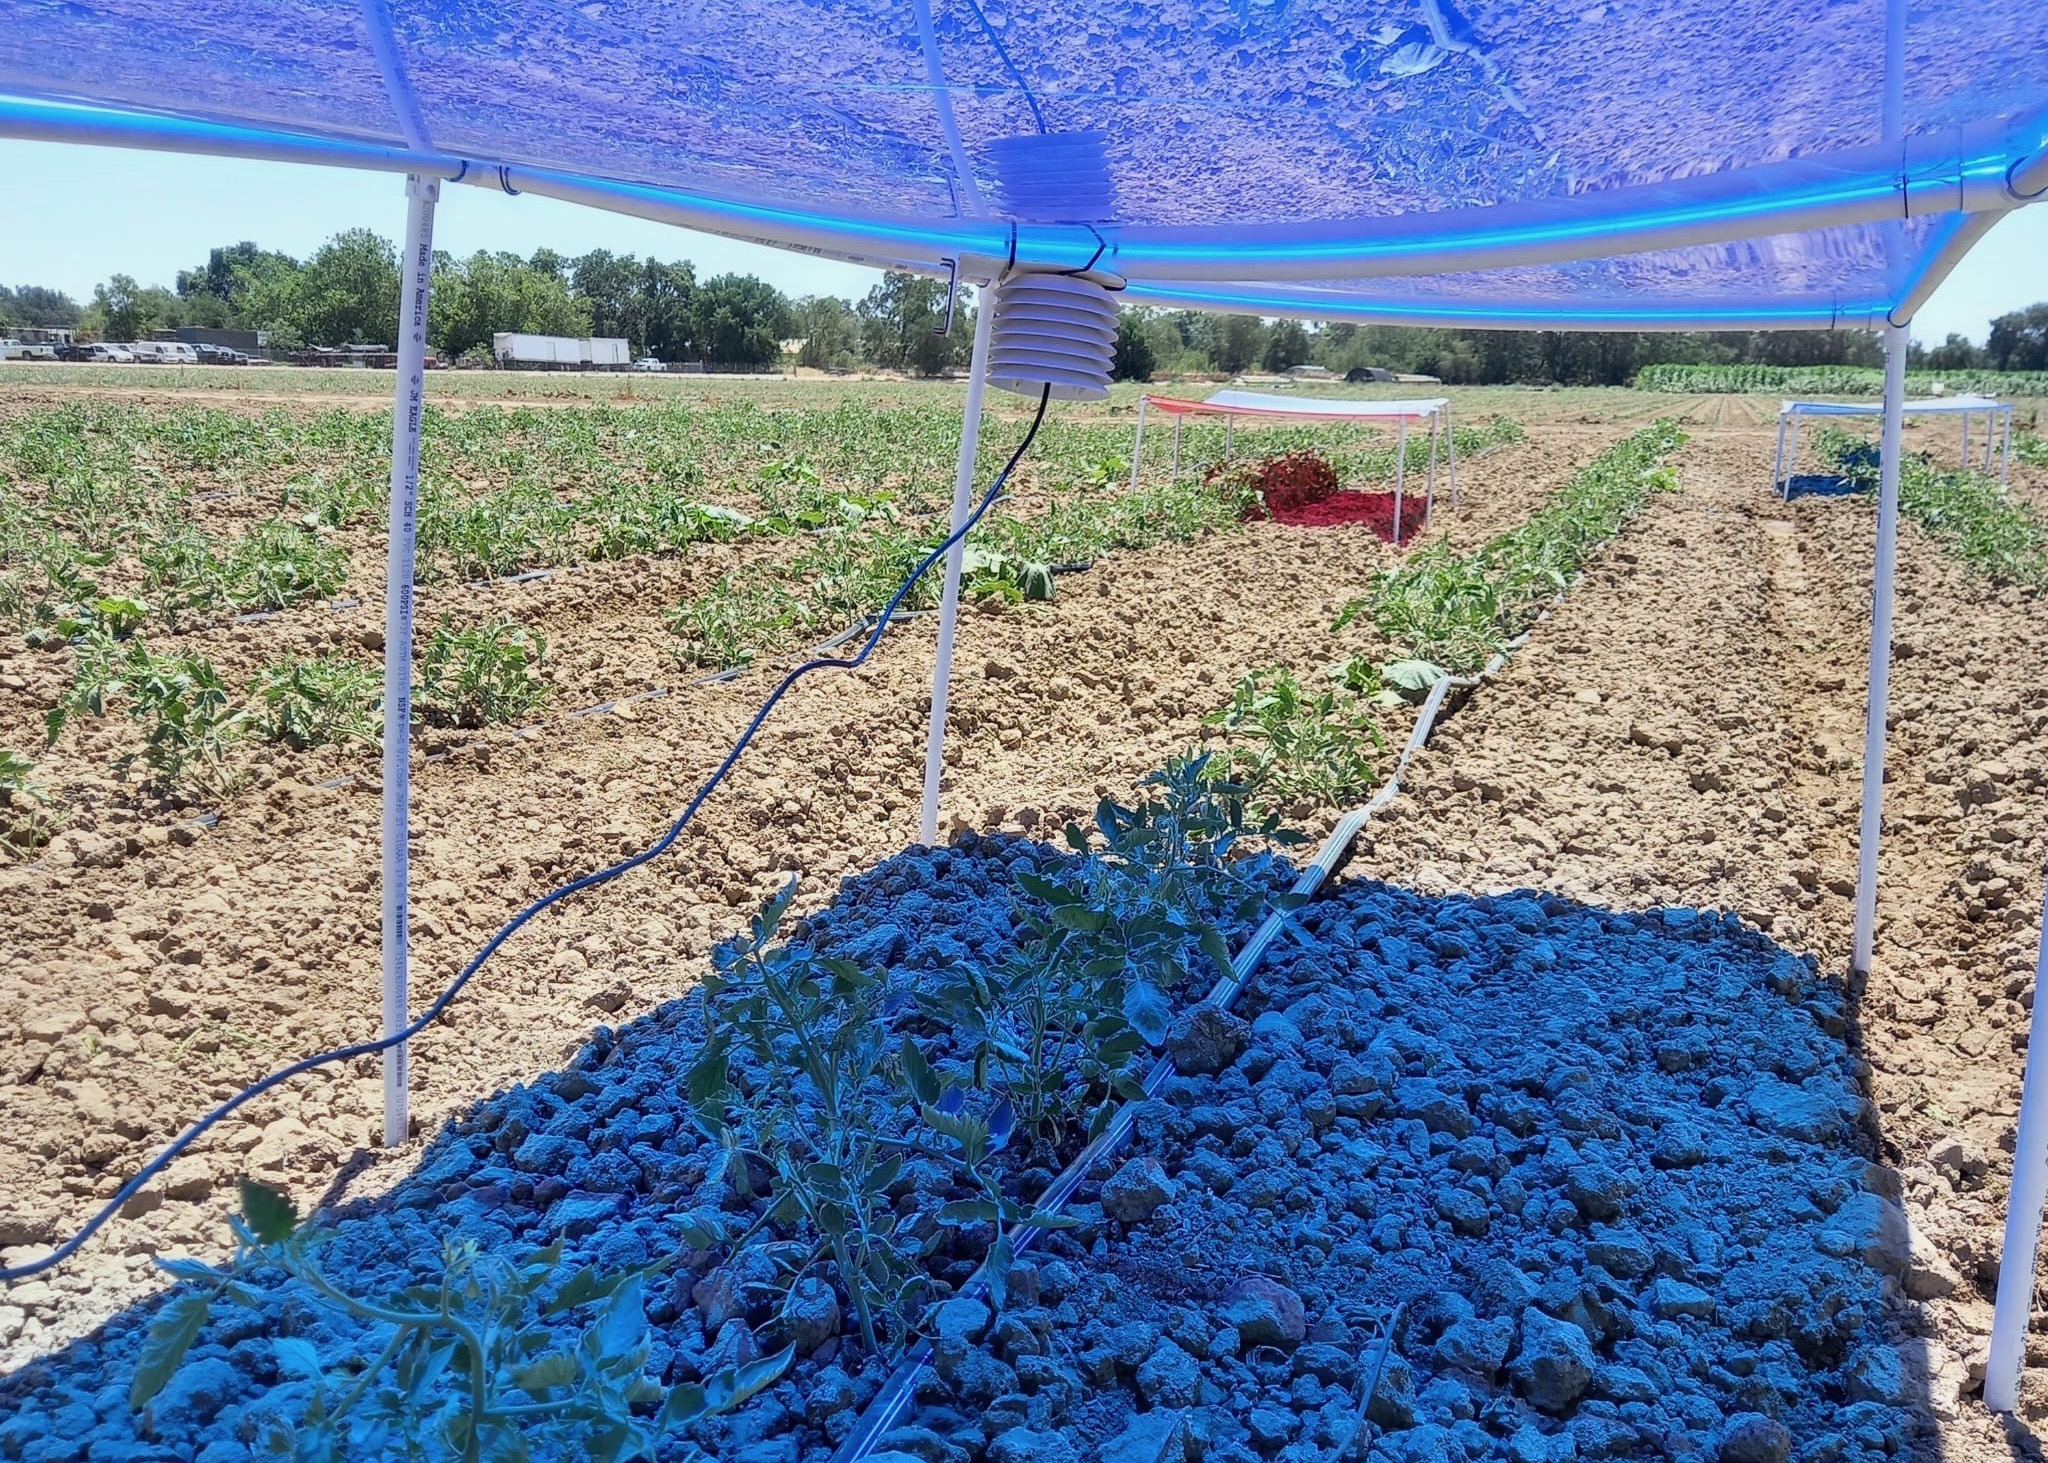  Solar filters in agrivoltaic system cast blue light on tomato plants at UC Davis research field